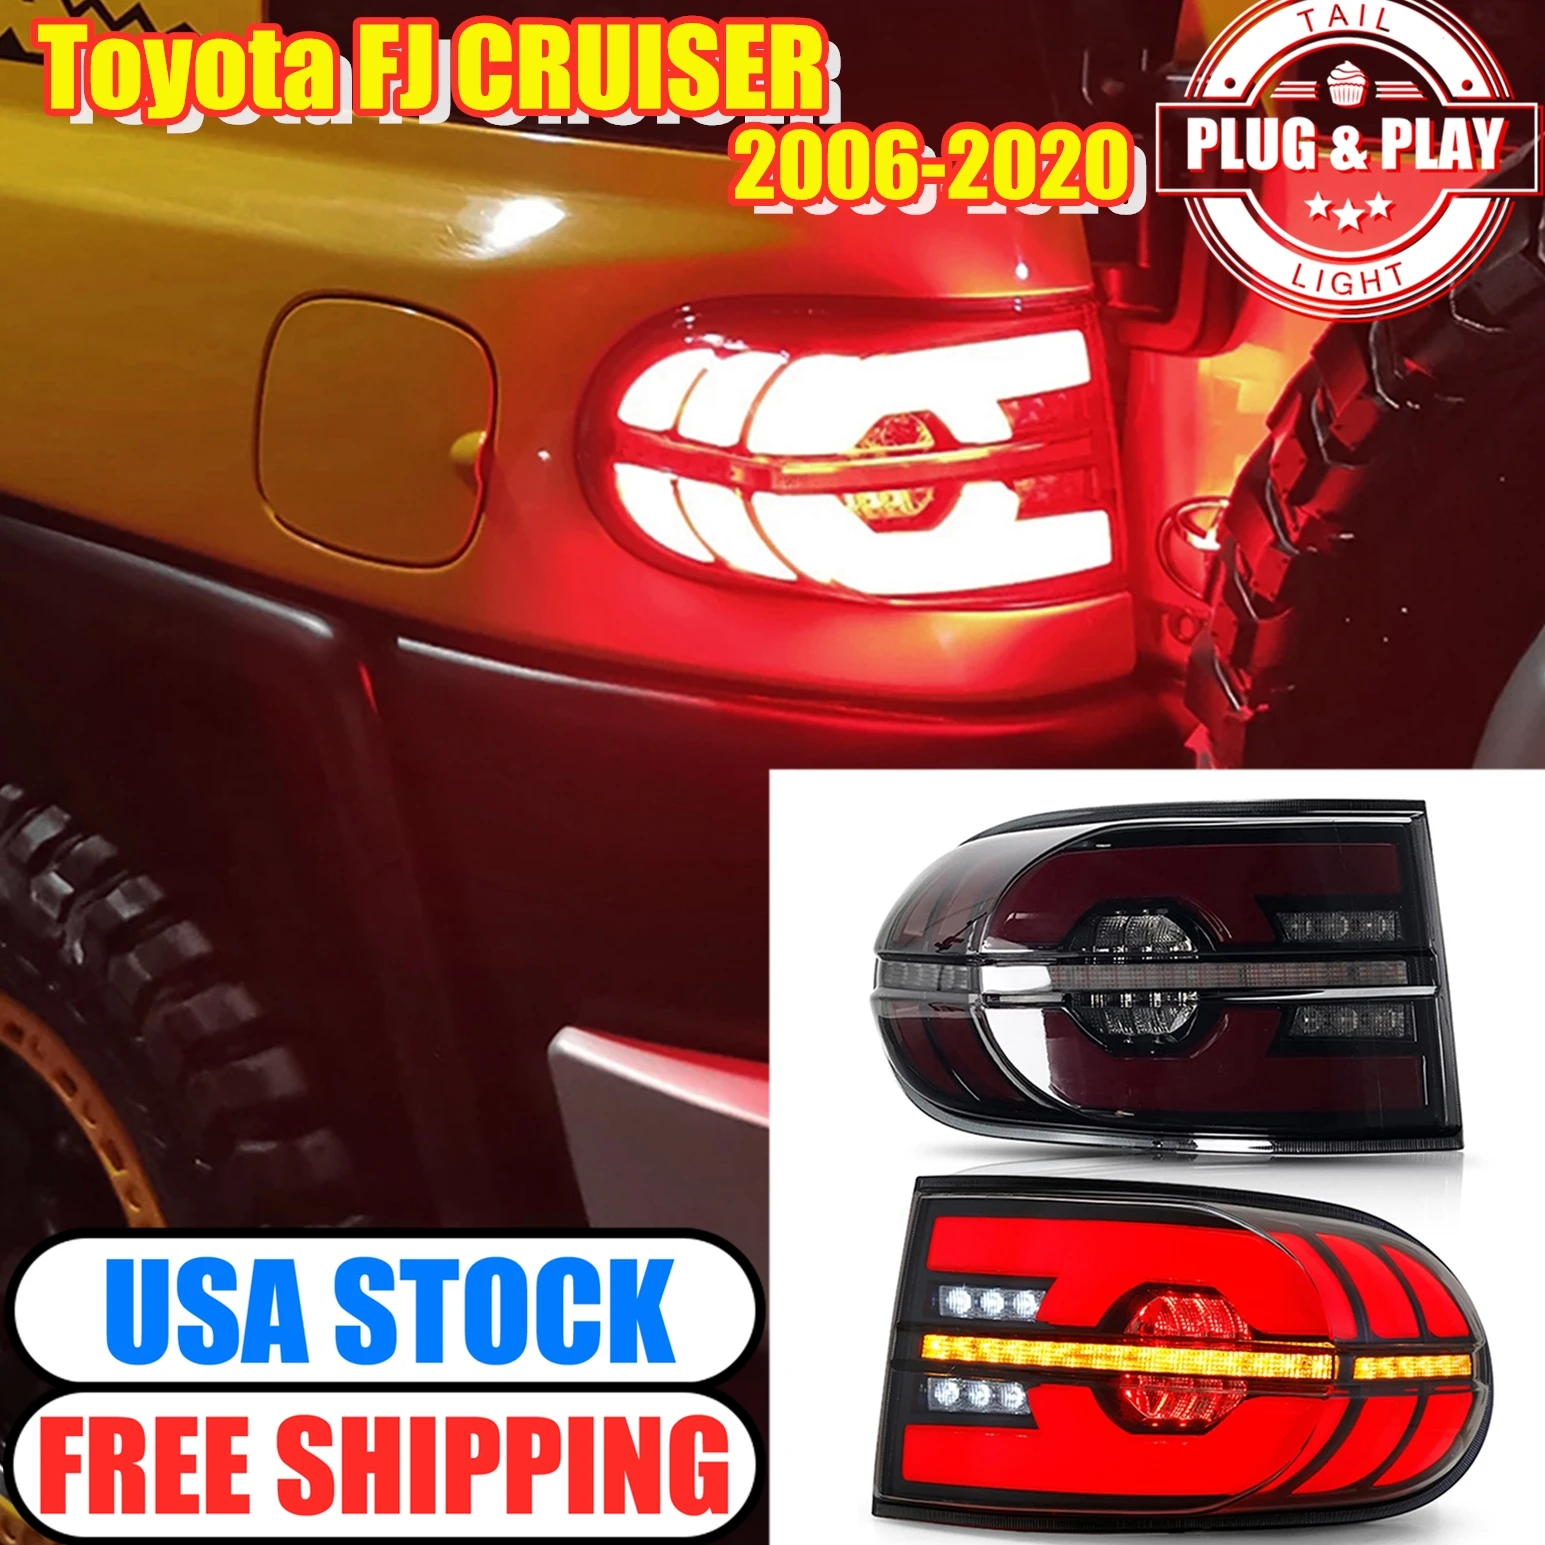 

Rear Lights for FJ Cruiser Tail Light 06-20 Toyota Led Taillight Assembly Smoke Sequential Dynamic Turn Signal Dual Reverse Lamp